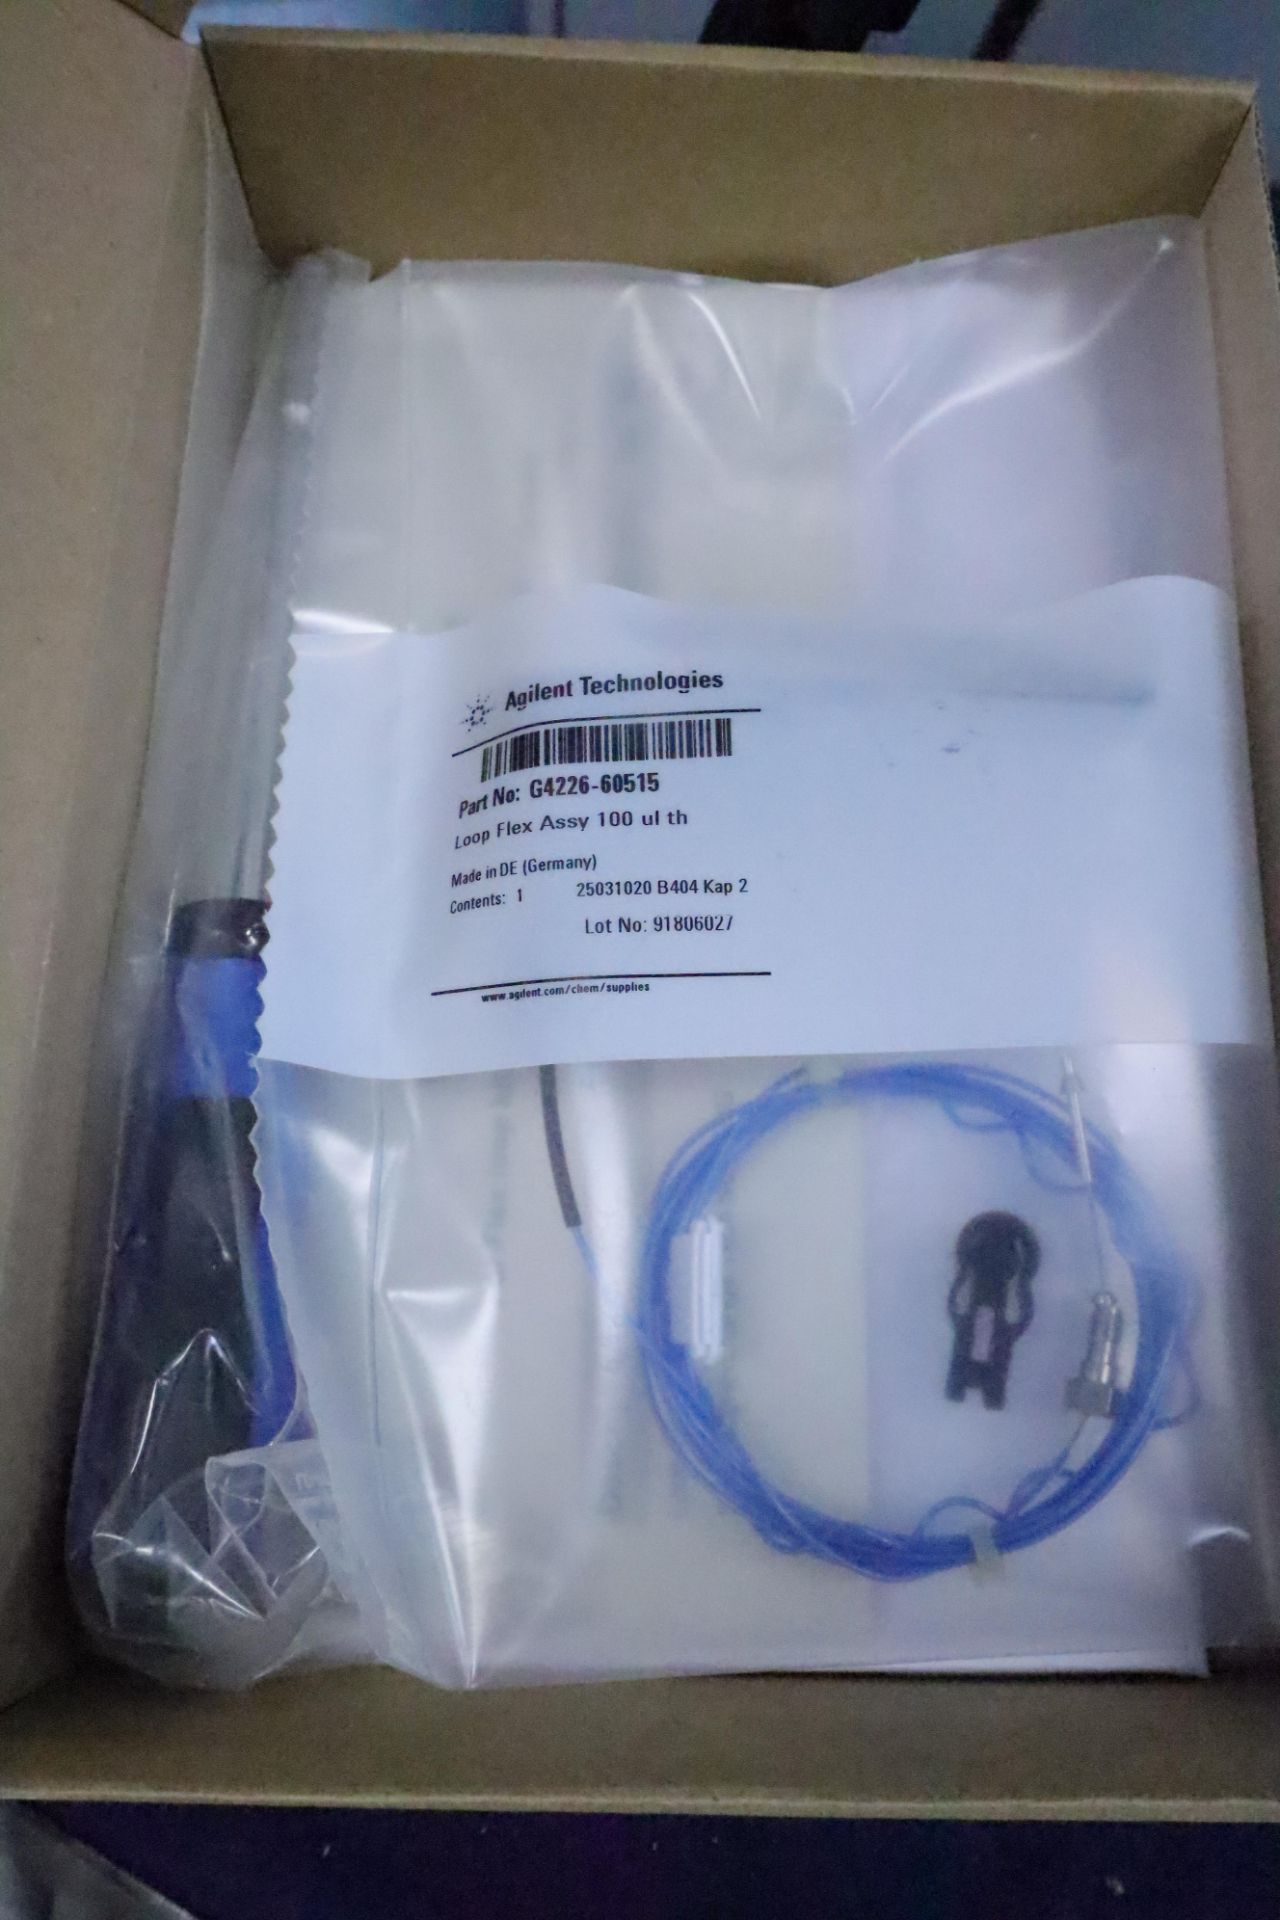 Agilent Technologies OEM Replacement Parts, Booklets and Recovery Drive - Image 3 of 32